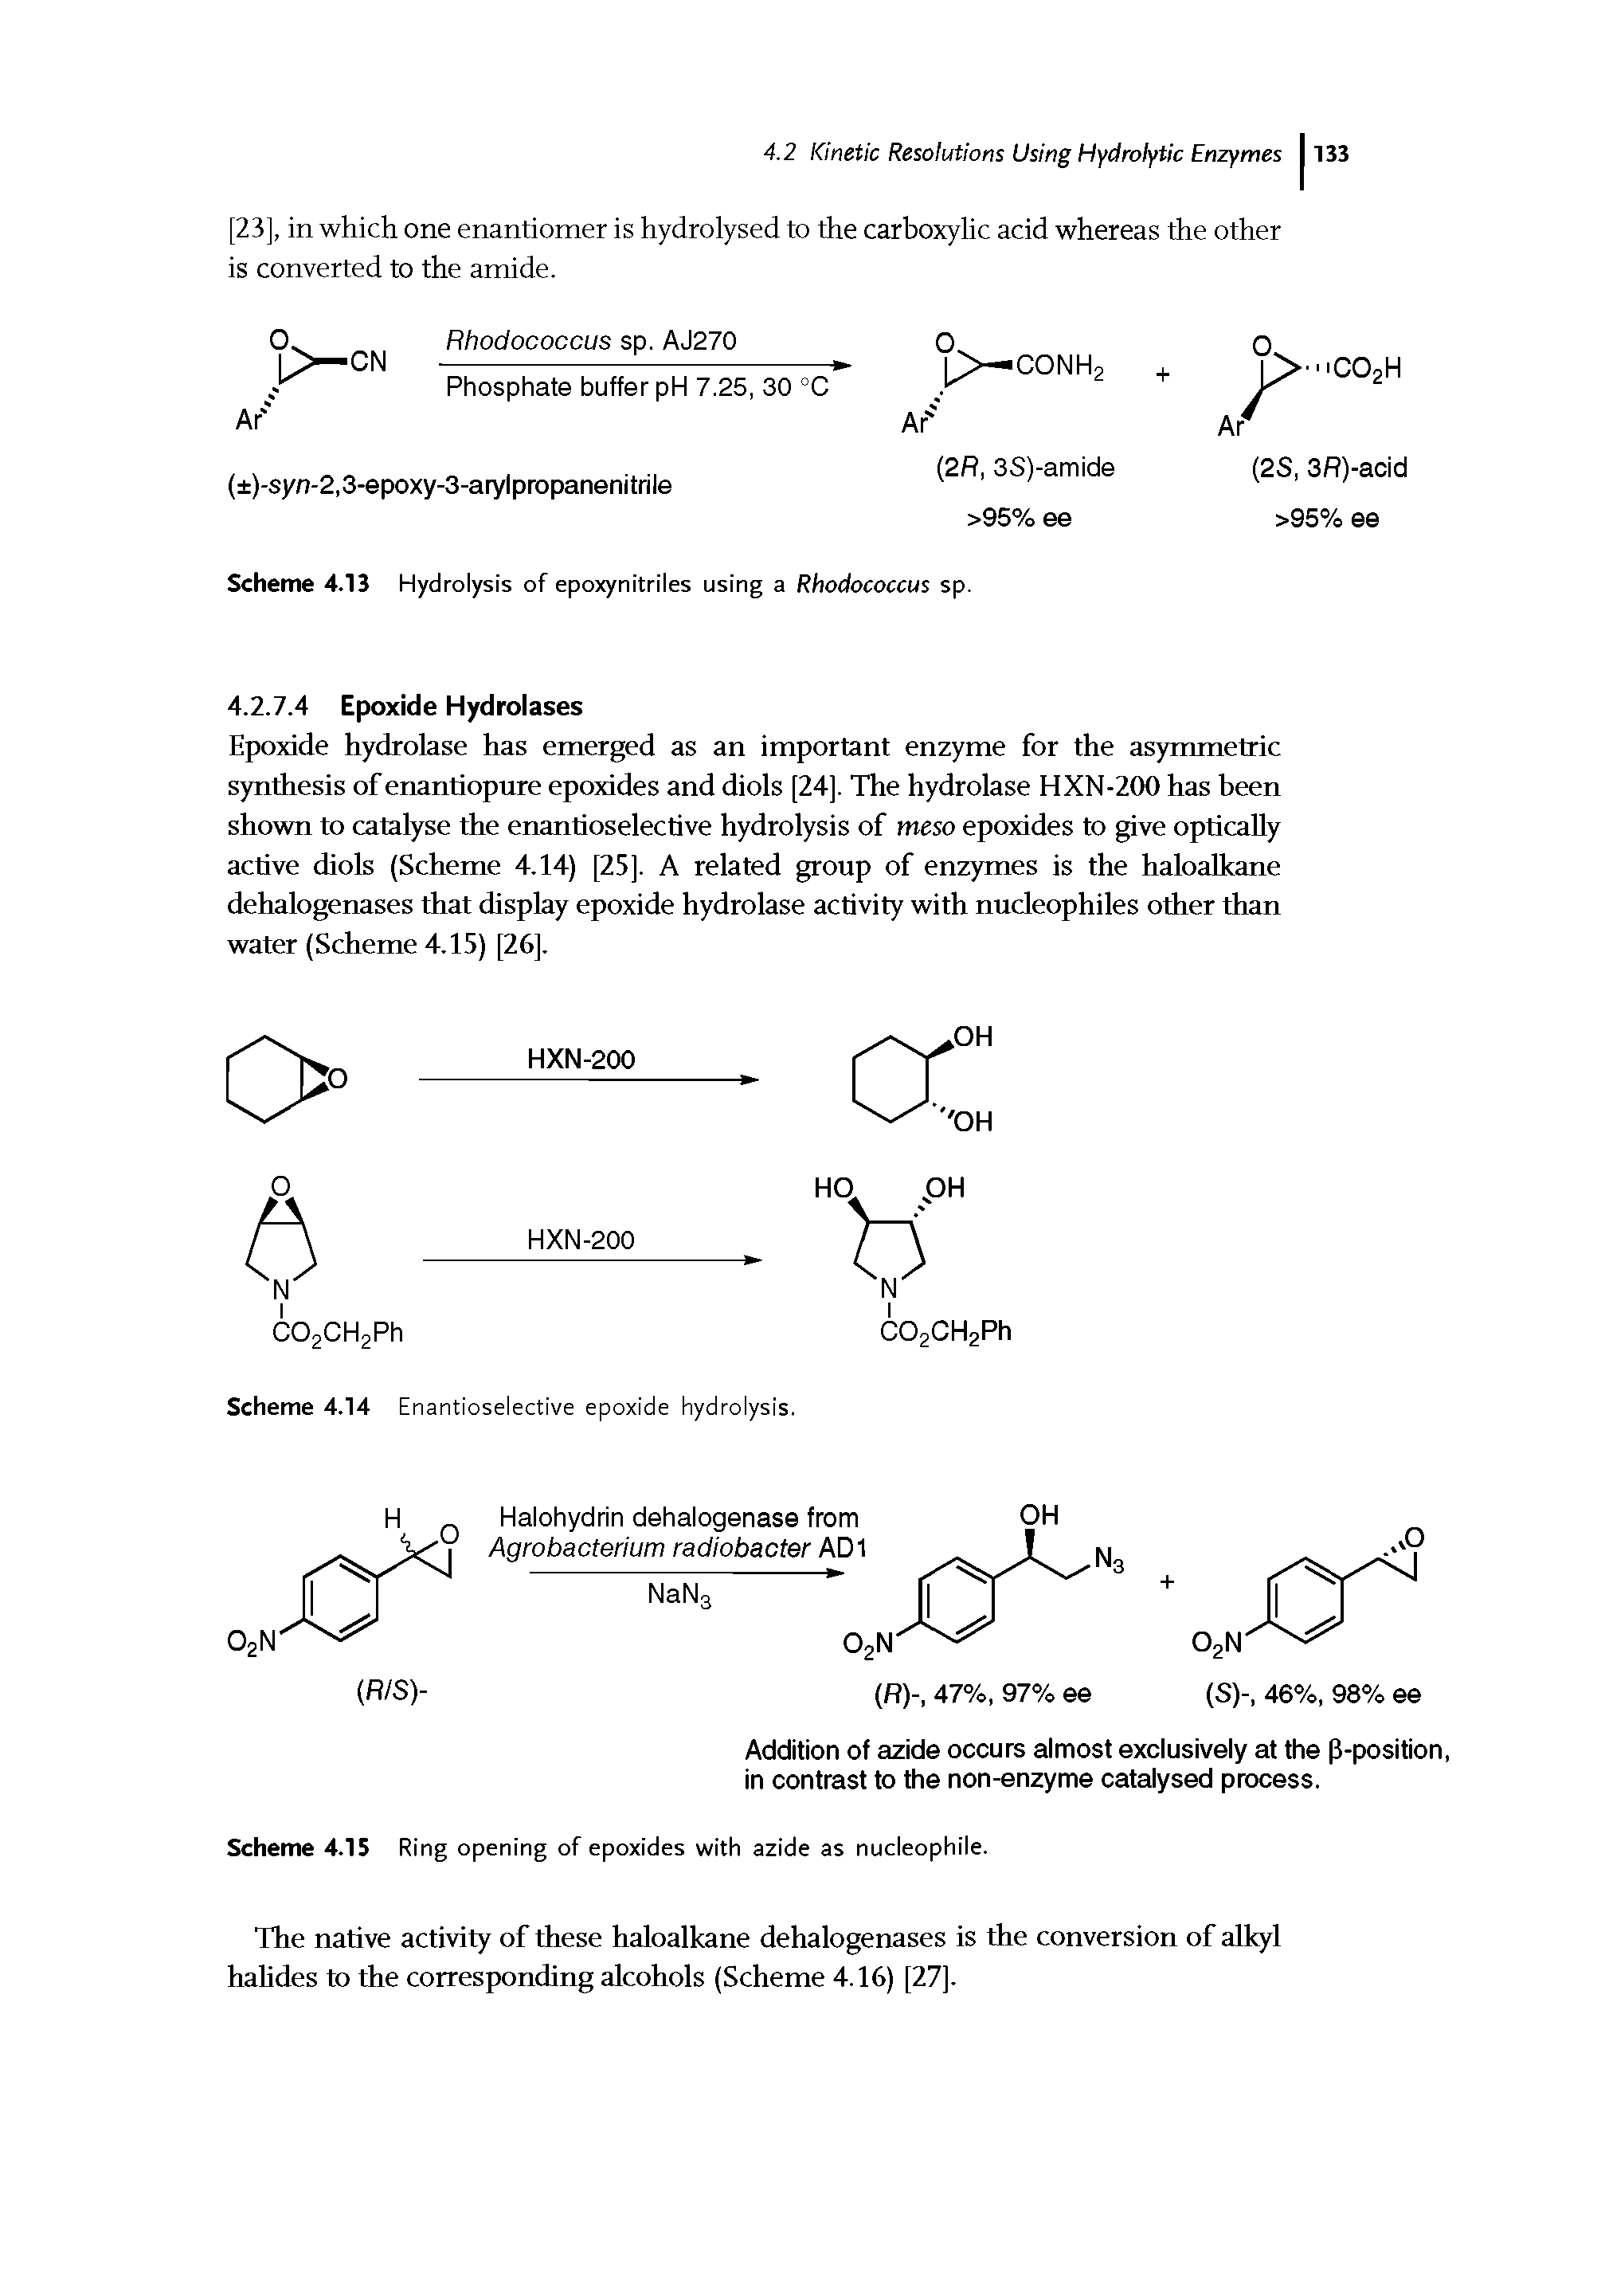 Scheme 4.15 Ring opening of epoxides with azide as nucleophile.